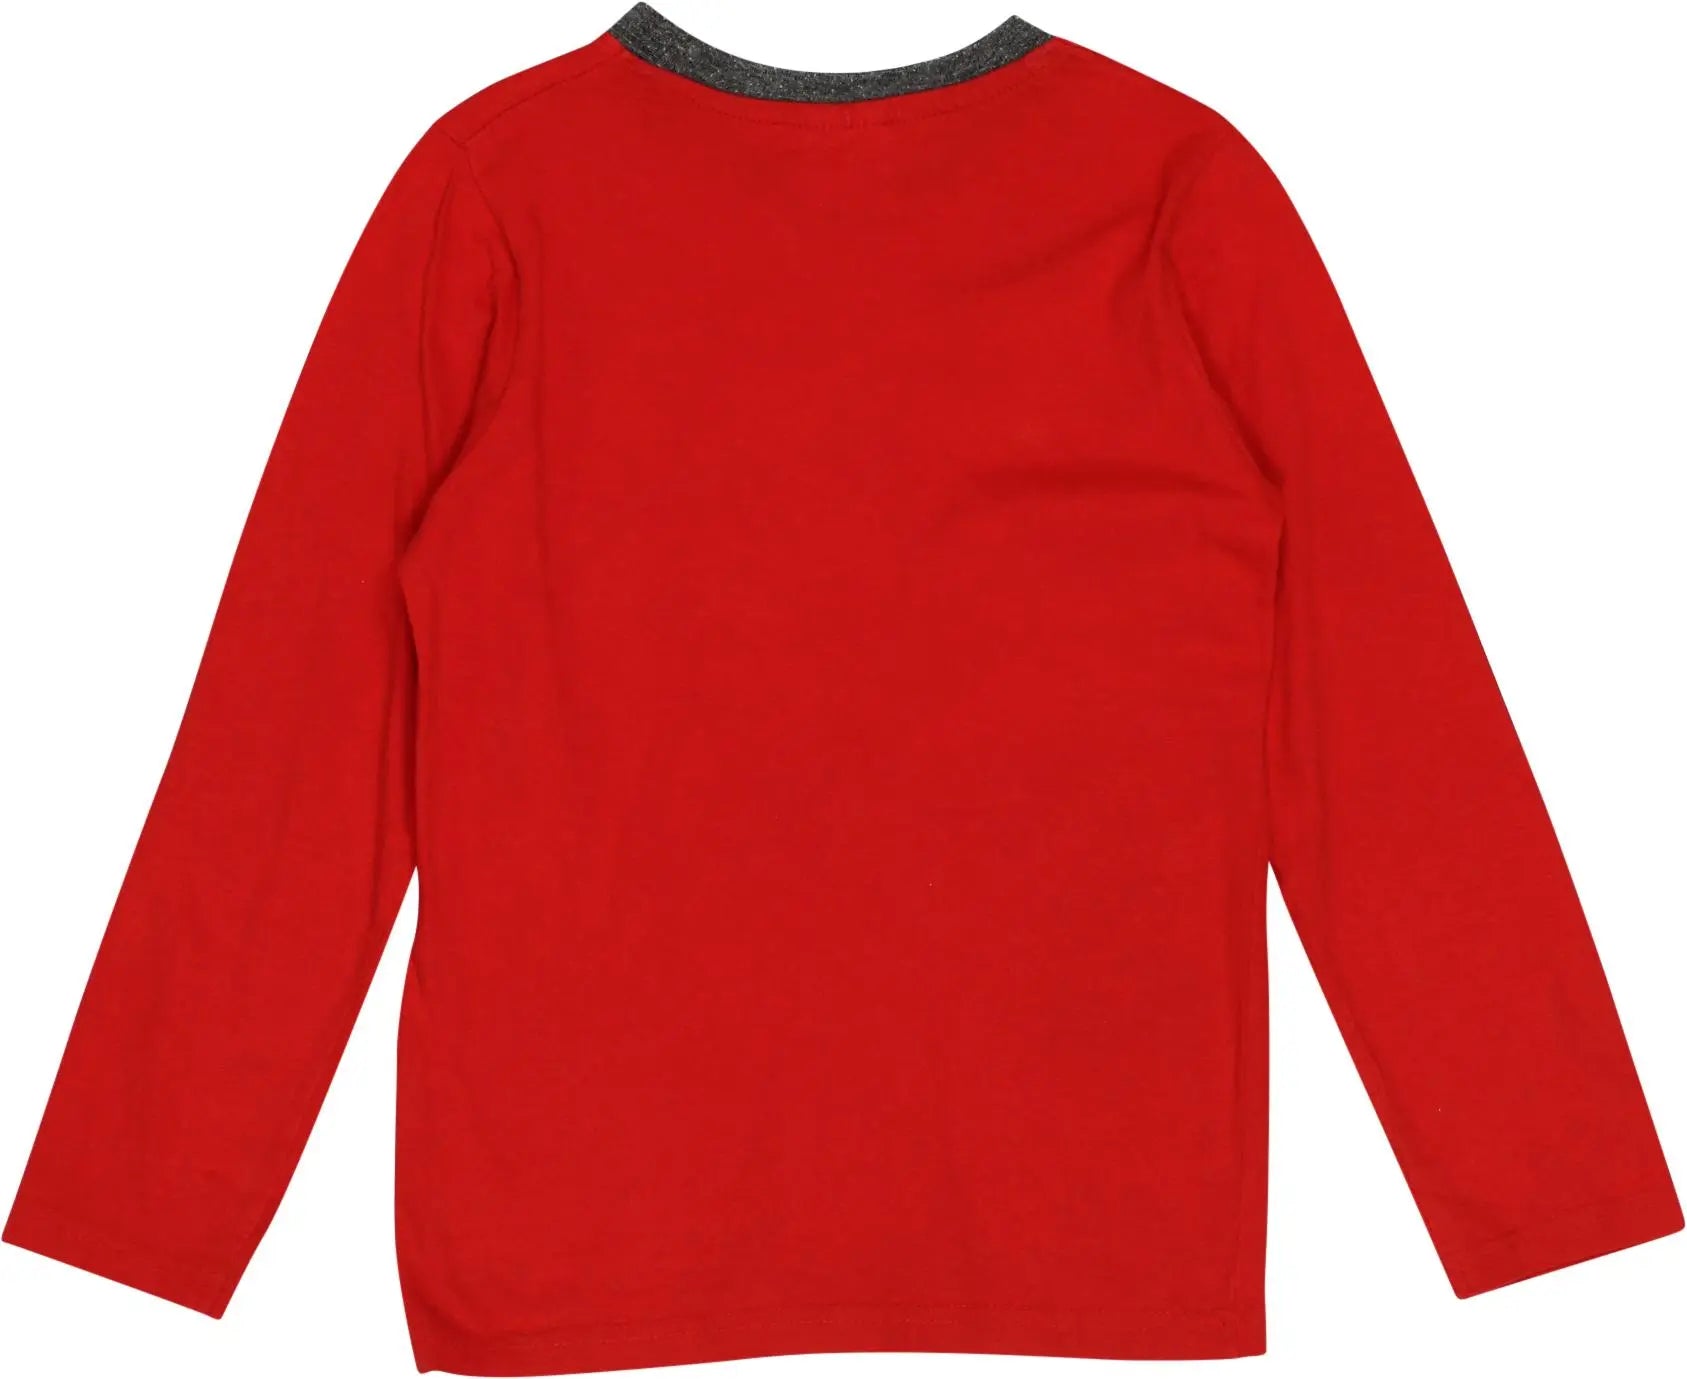 Europe Kids - Red Long Sleeve T-shirt- ThriftTale.com - Vintage and second handclothing